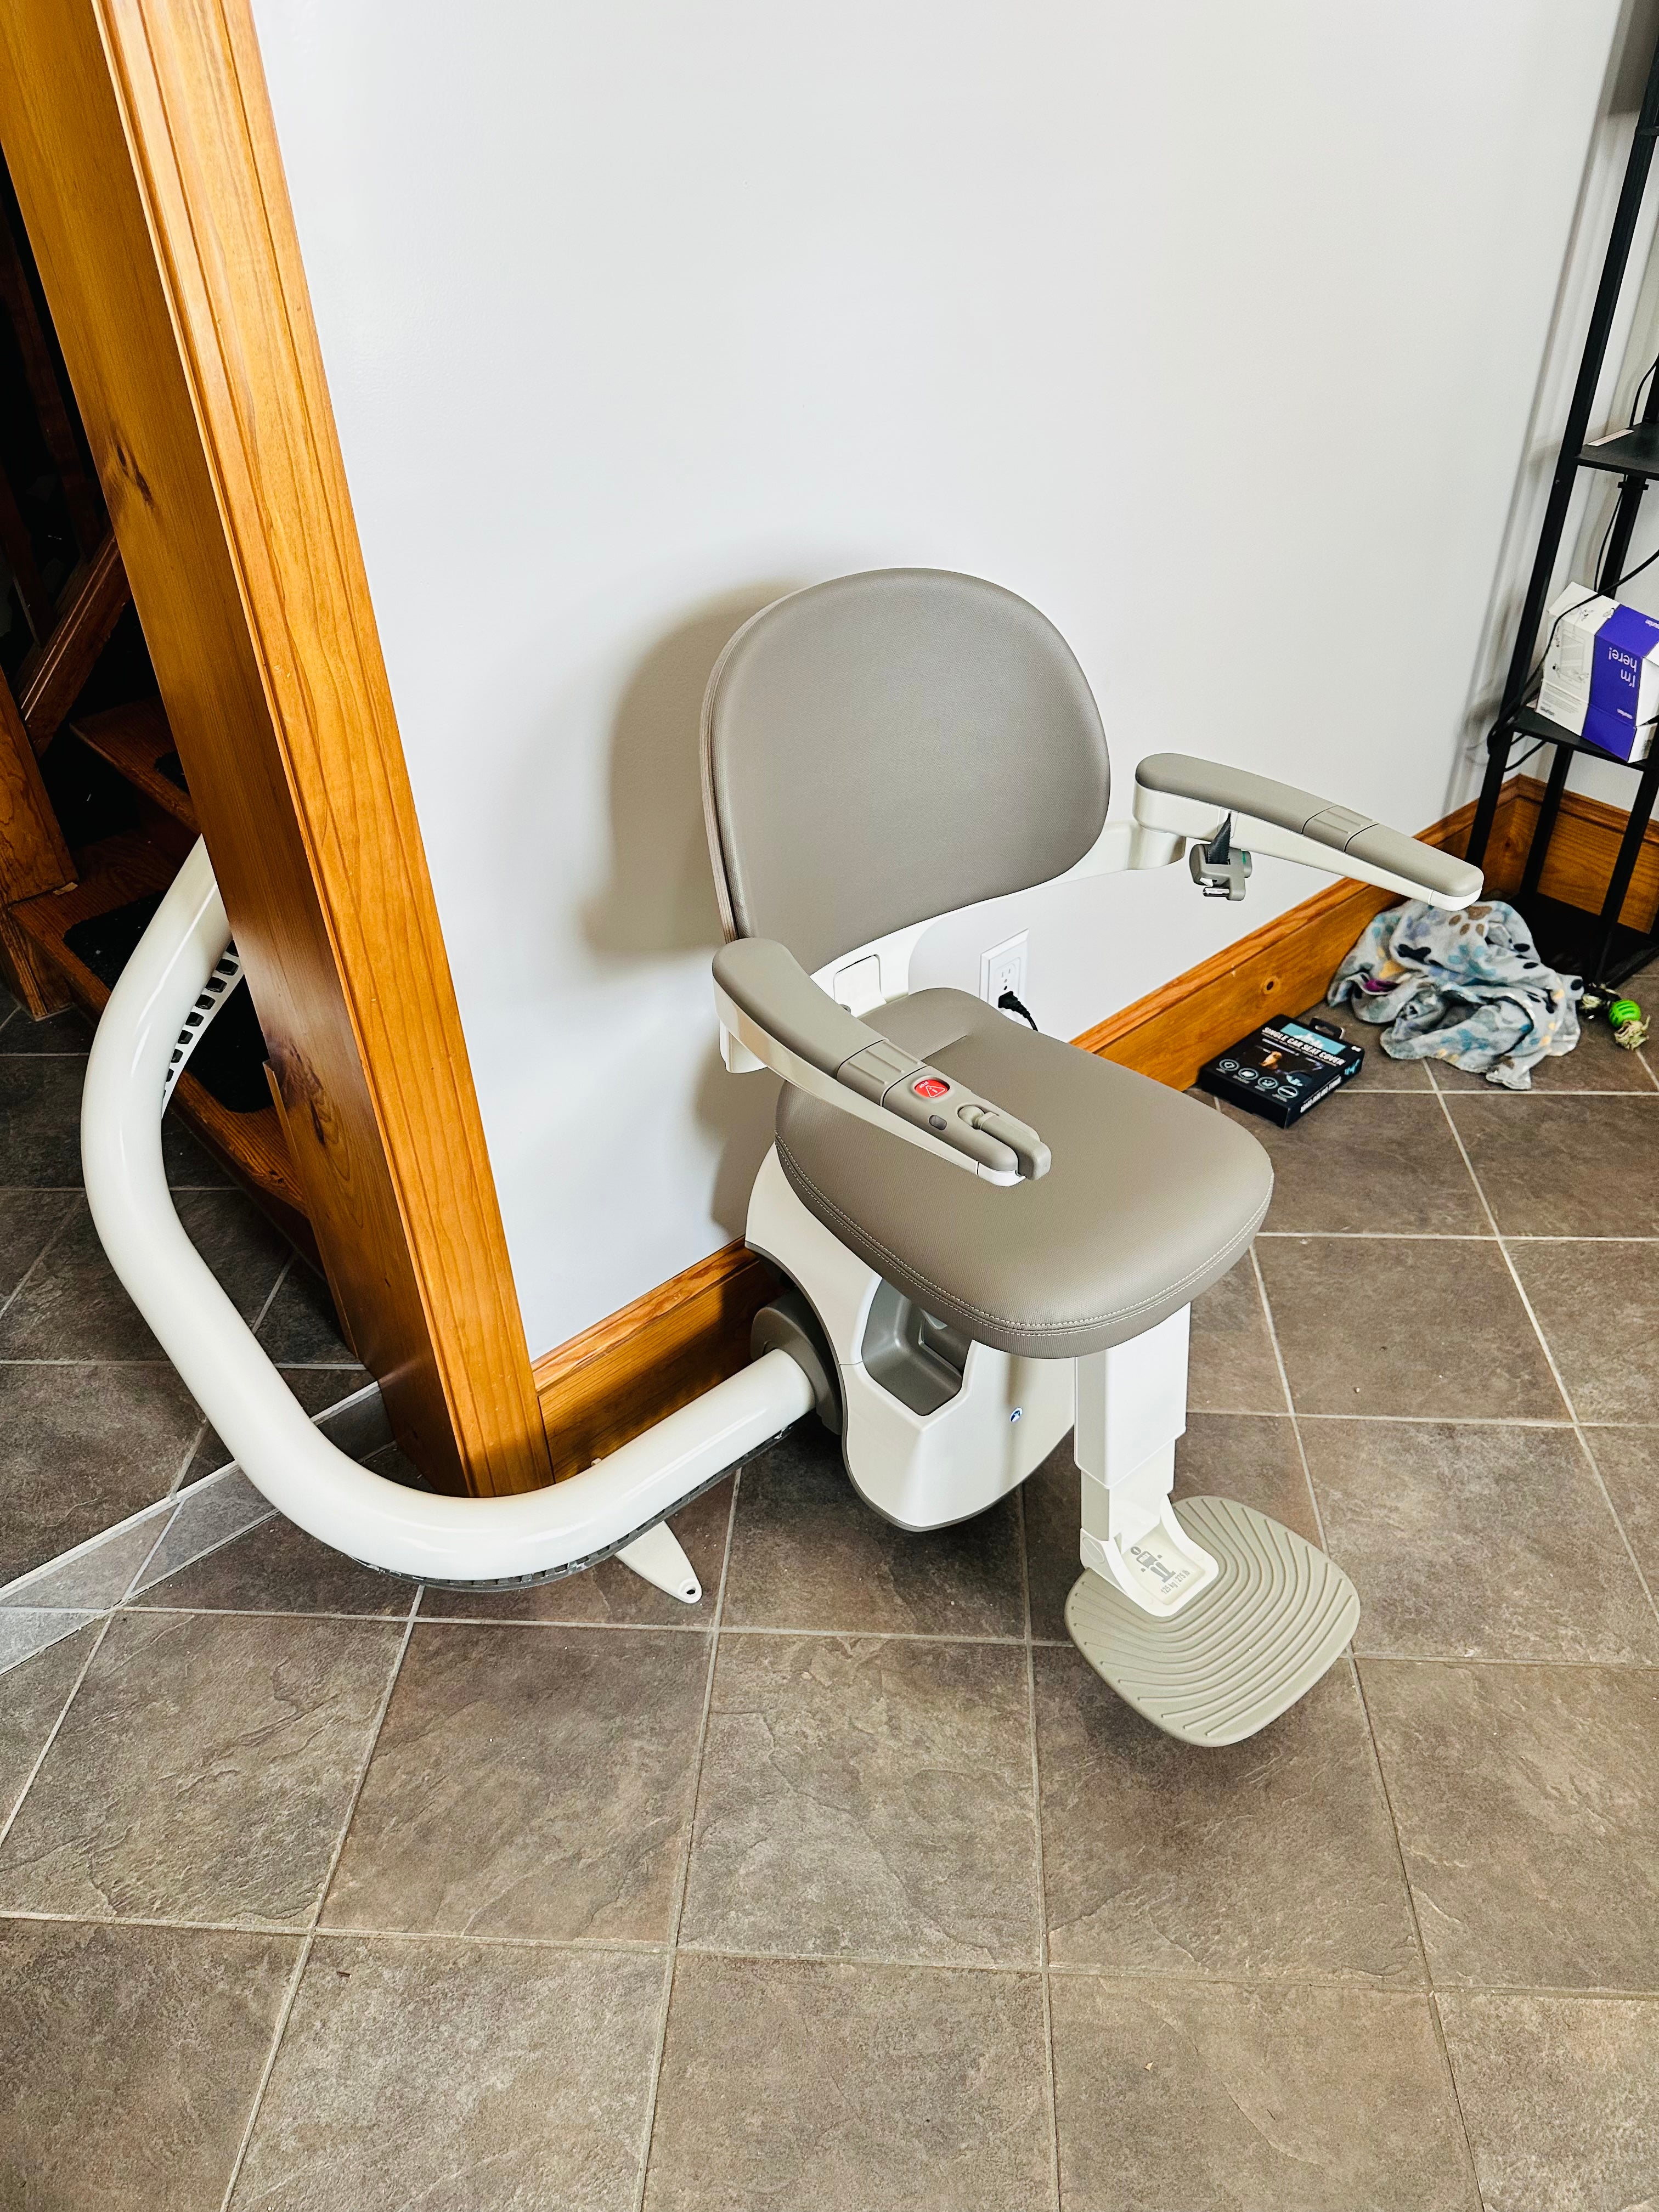 Benefits of a Stairlift